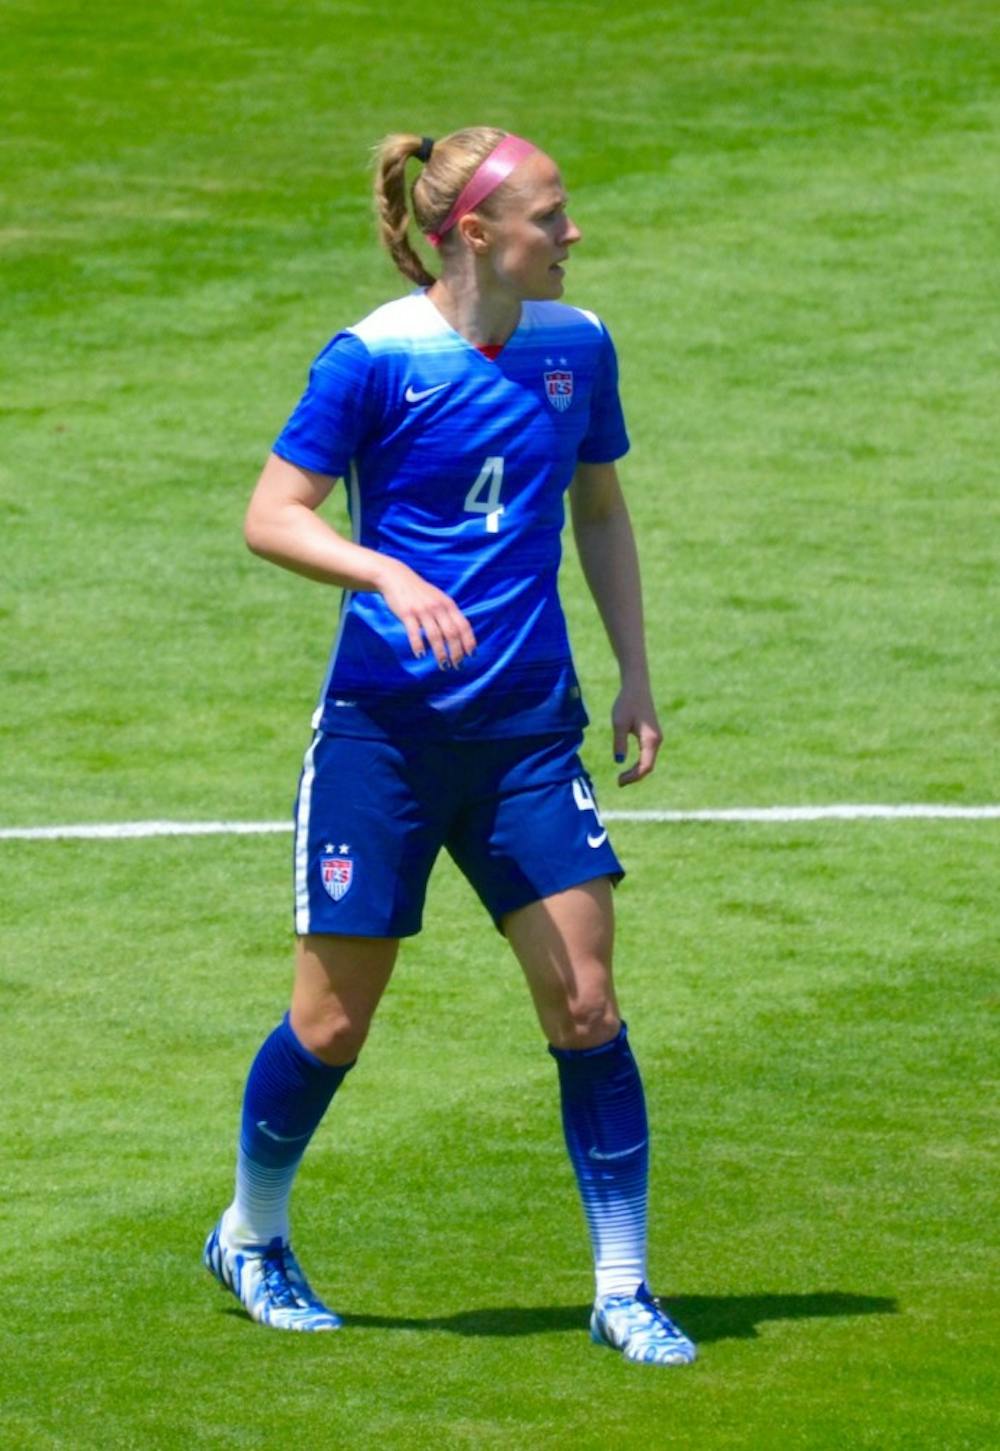 <p>Former Cavalier Becky Sauerbrunn started at center back for U.S. Women's National Team at the 2015 FIFA Women's World Cup. She played every minute of every match for the victorious Americans.</p>